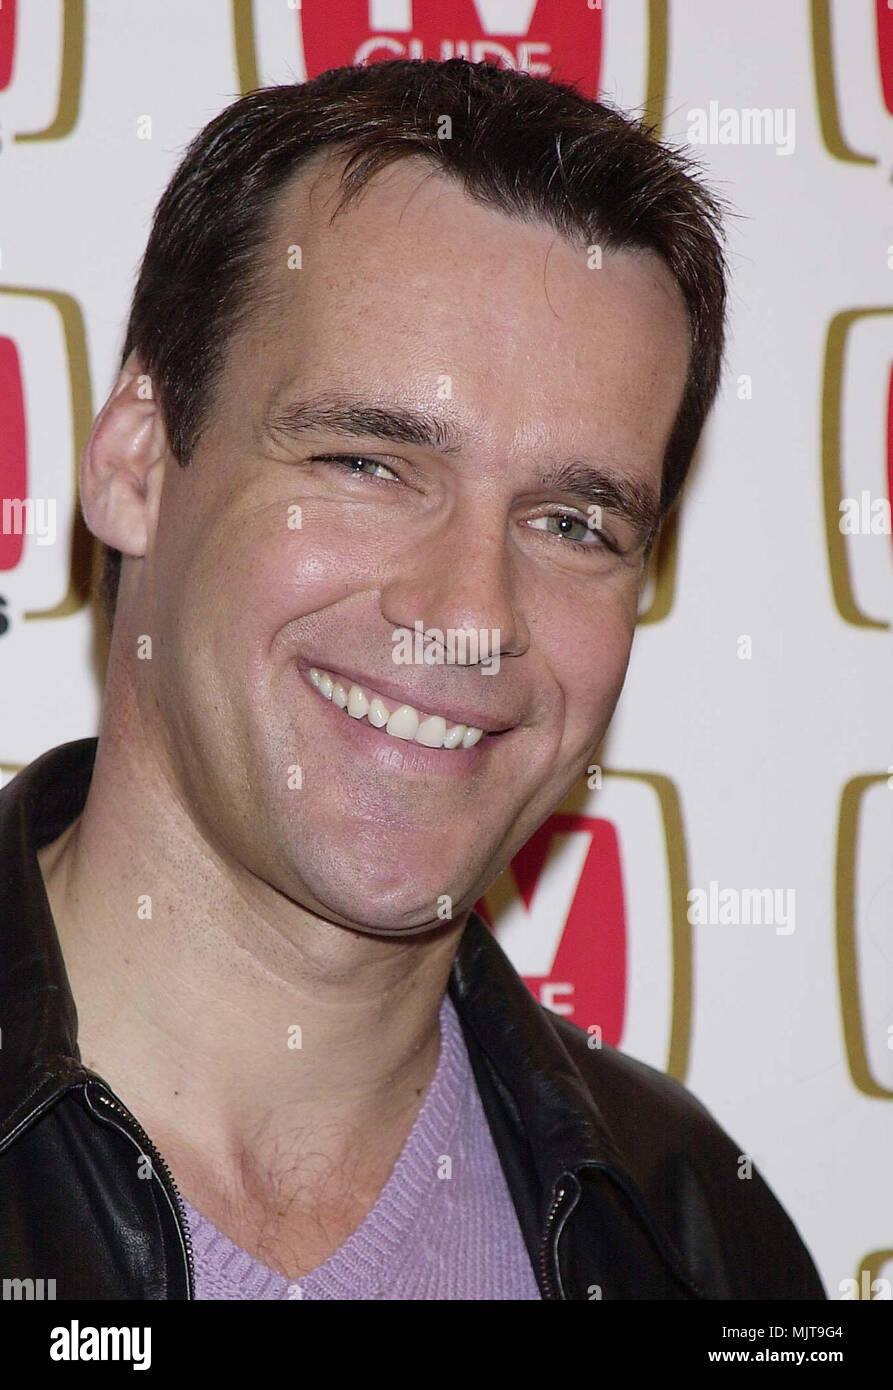 Jan 29, 2001; Los Angeles, CA, USA; TVguide Awards  Nominations was held at the Beverly Hills Hotel. Elliott.David.James.10.jpgElliott.David.James.10  Event in Hollywood Life - California,  Red Carpet Event, Vertical, USA, Film Industry, Celebrities,  Photography, Bestof, Arts Culture and Entertainment, Topix Celebrities fashion /  from the Red Carpet-1994-2000, one person, Vertical, Best of, Hollywood Life, Event in Hollywood Life - California,  Red Carpet and backstage, USA, Film Industry, Celebrities,  movie celebrities, TV celebrities, Music celebrities, Photography, Bestof, Arts Culture a Stock Photo